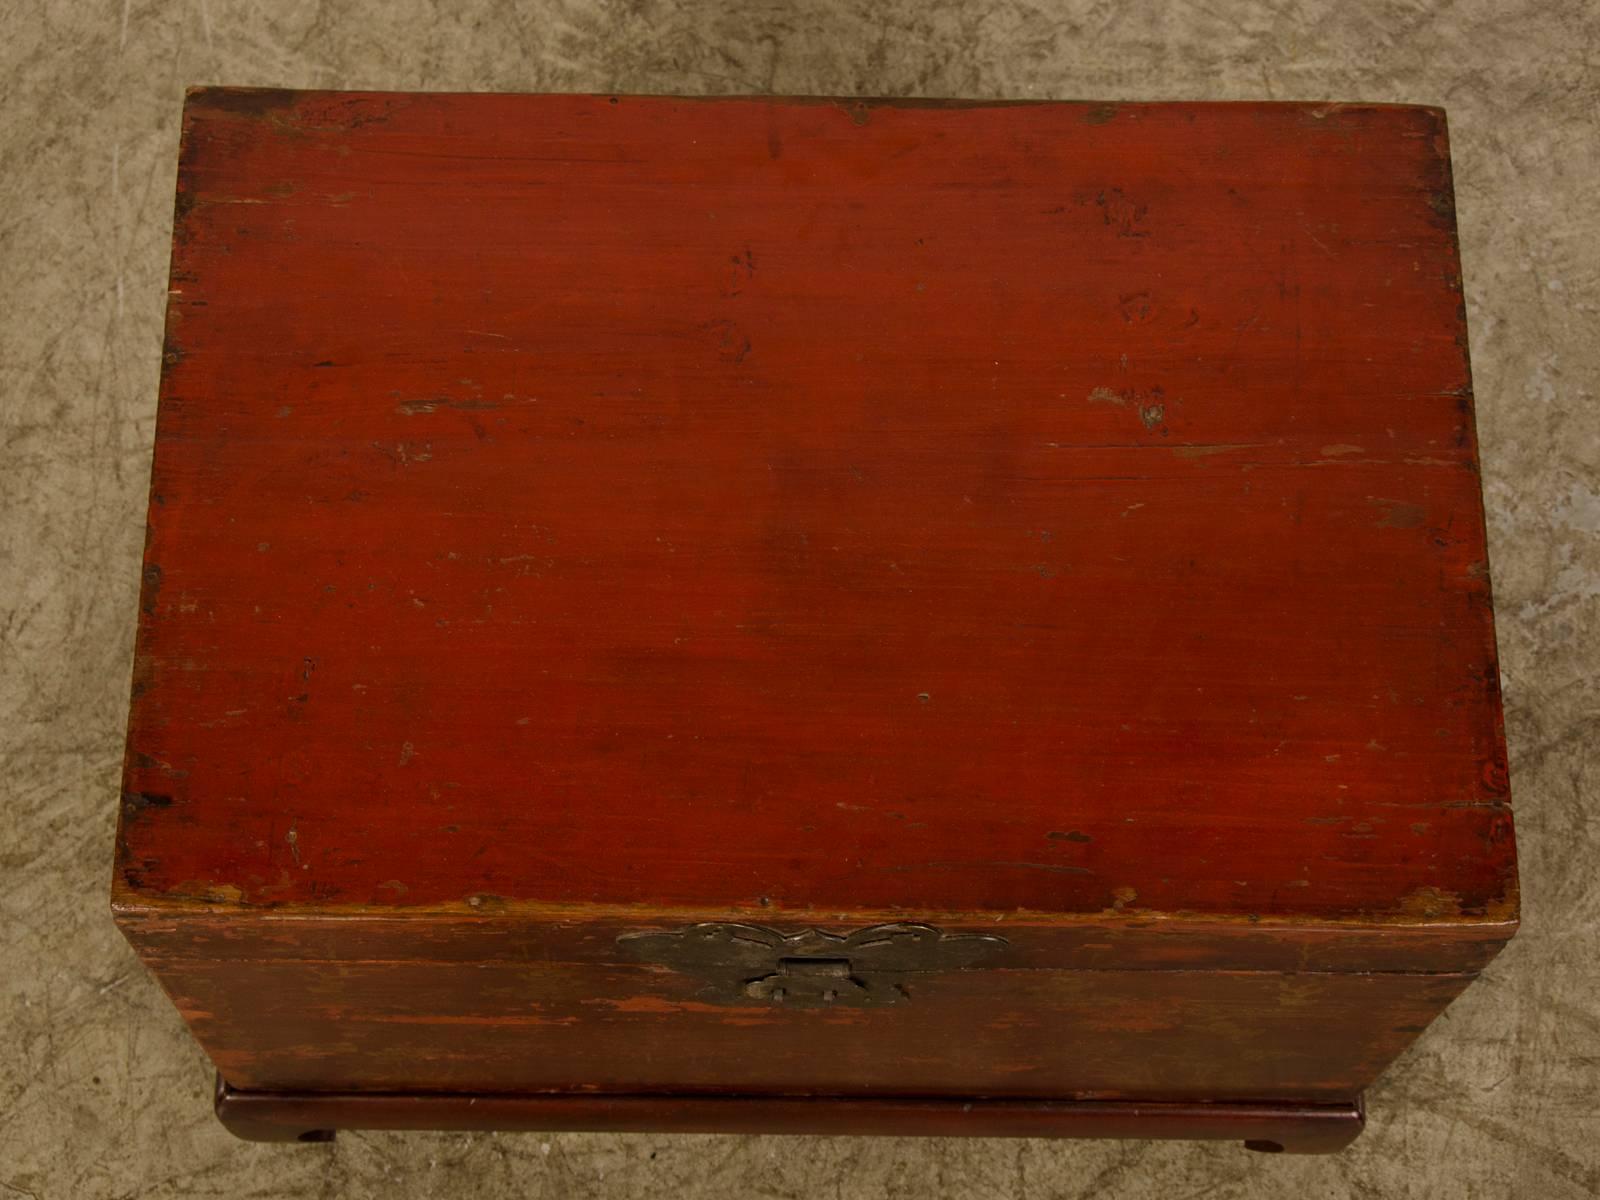 Red Lacquer Antique Chinese Trunk Kuang Hsu Period, circa 1875 For Sale 2